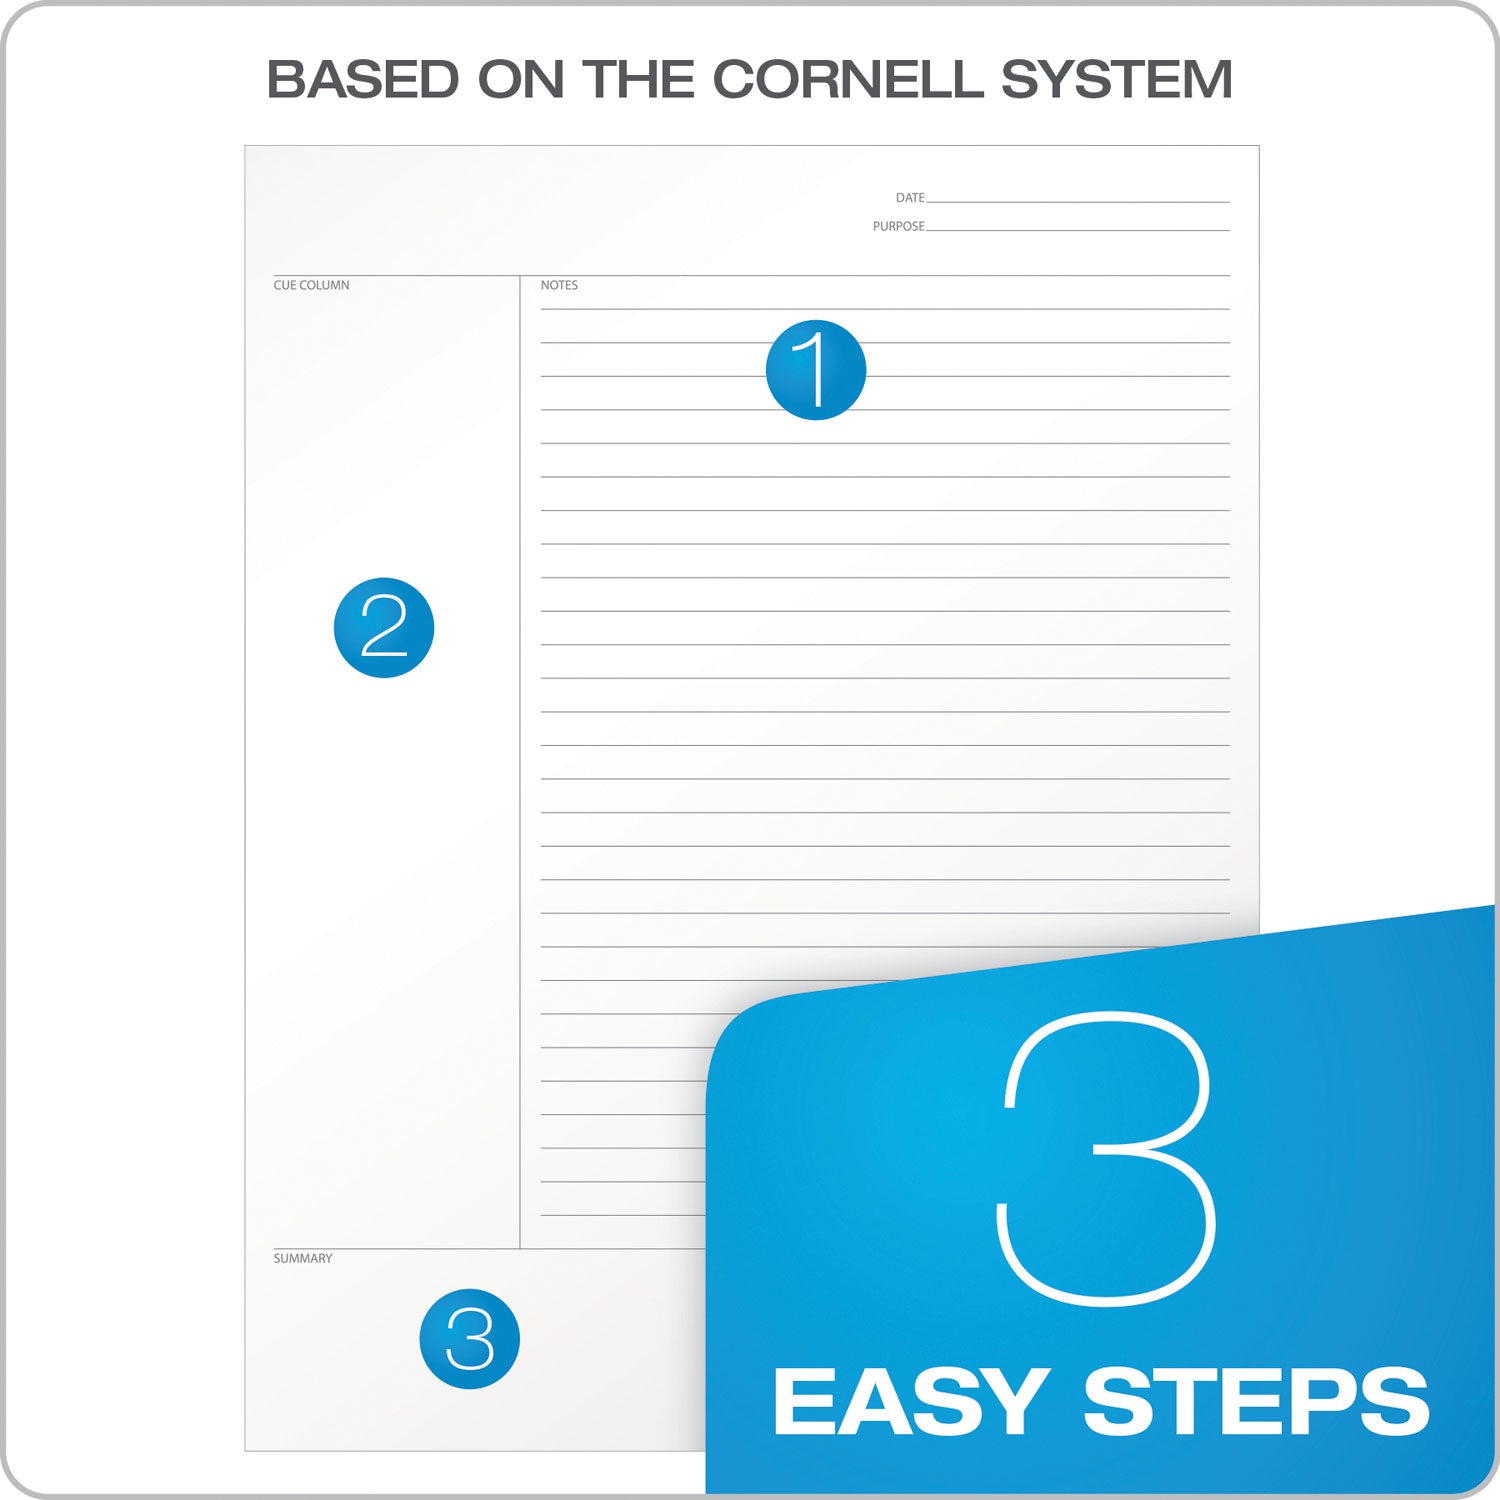 FocusNotes Notebook, 1-Subject, Lecture/Cornell Rule, Blue Cover, (100) 11 x 9 Sheets - 